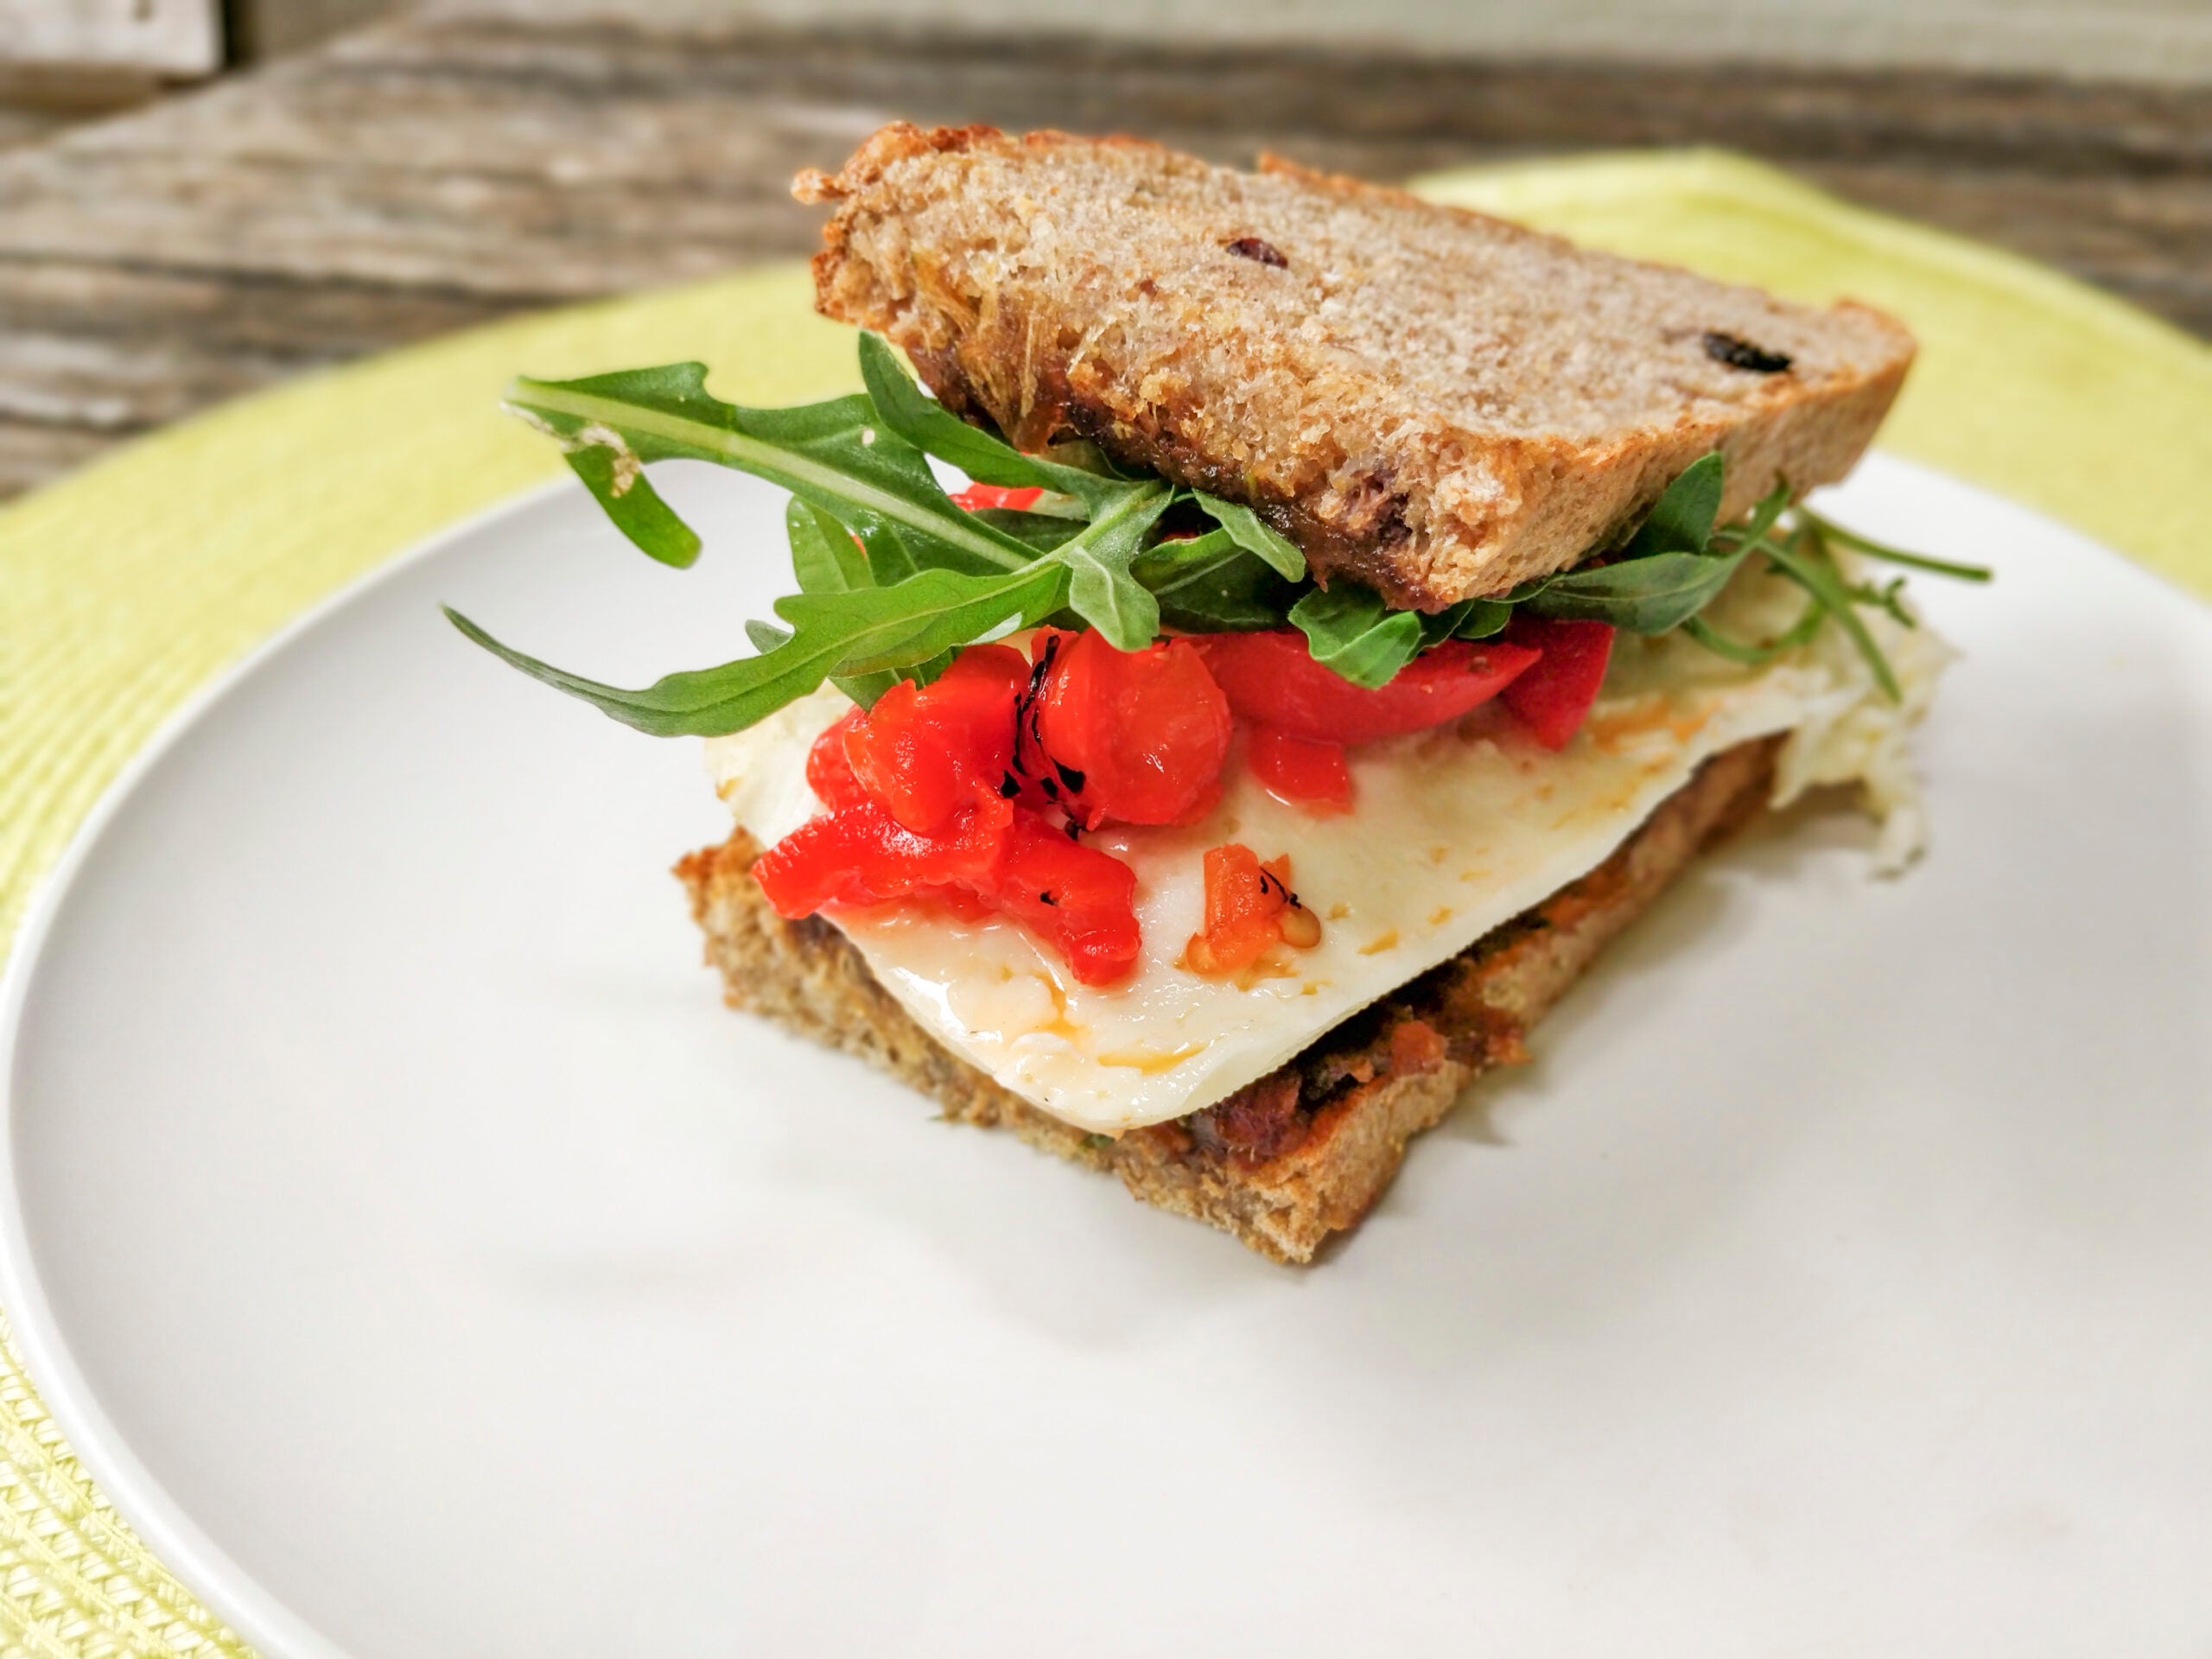 A healthy sandwich recipe for halloumi grilled cheese sandwich